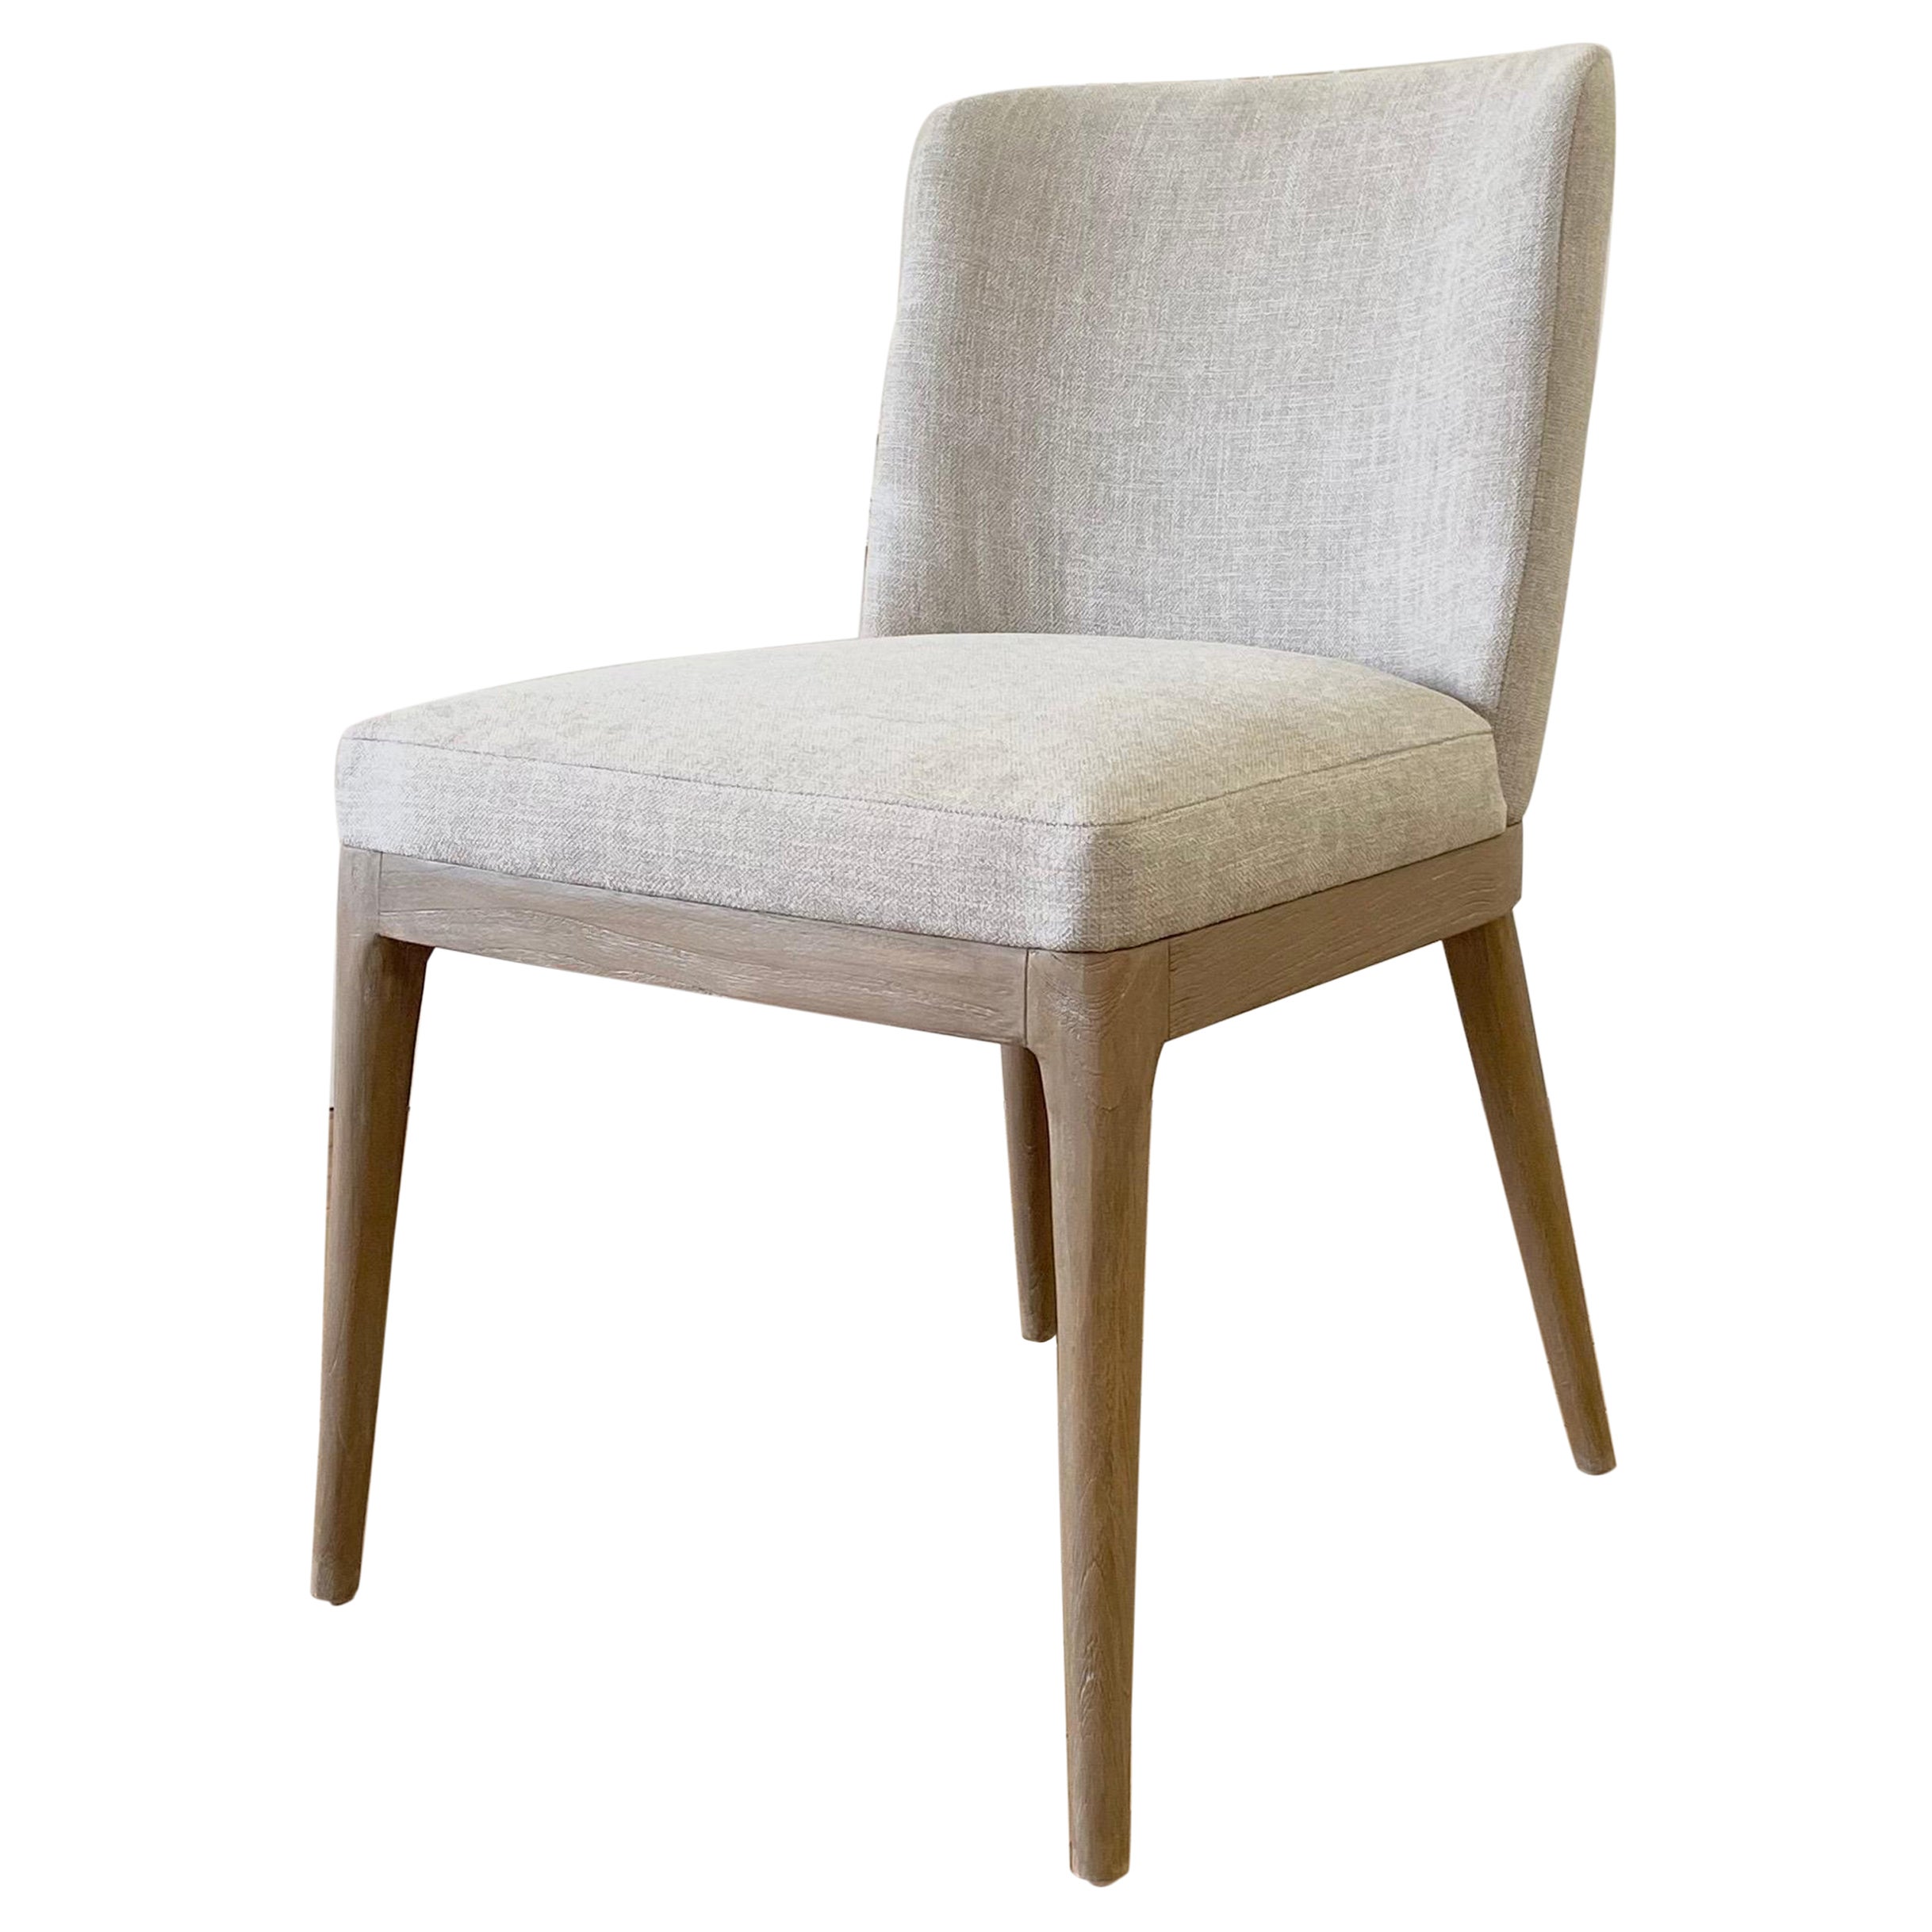 Contemporary Upholstered Dining Chairs For Sale